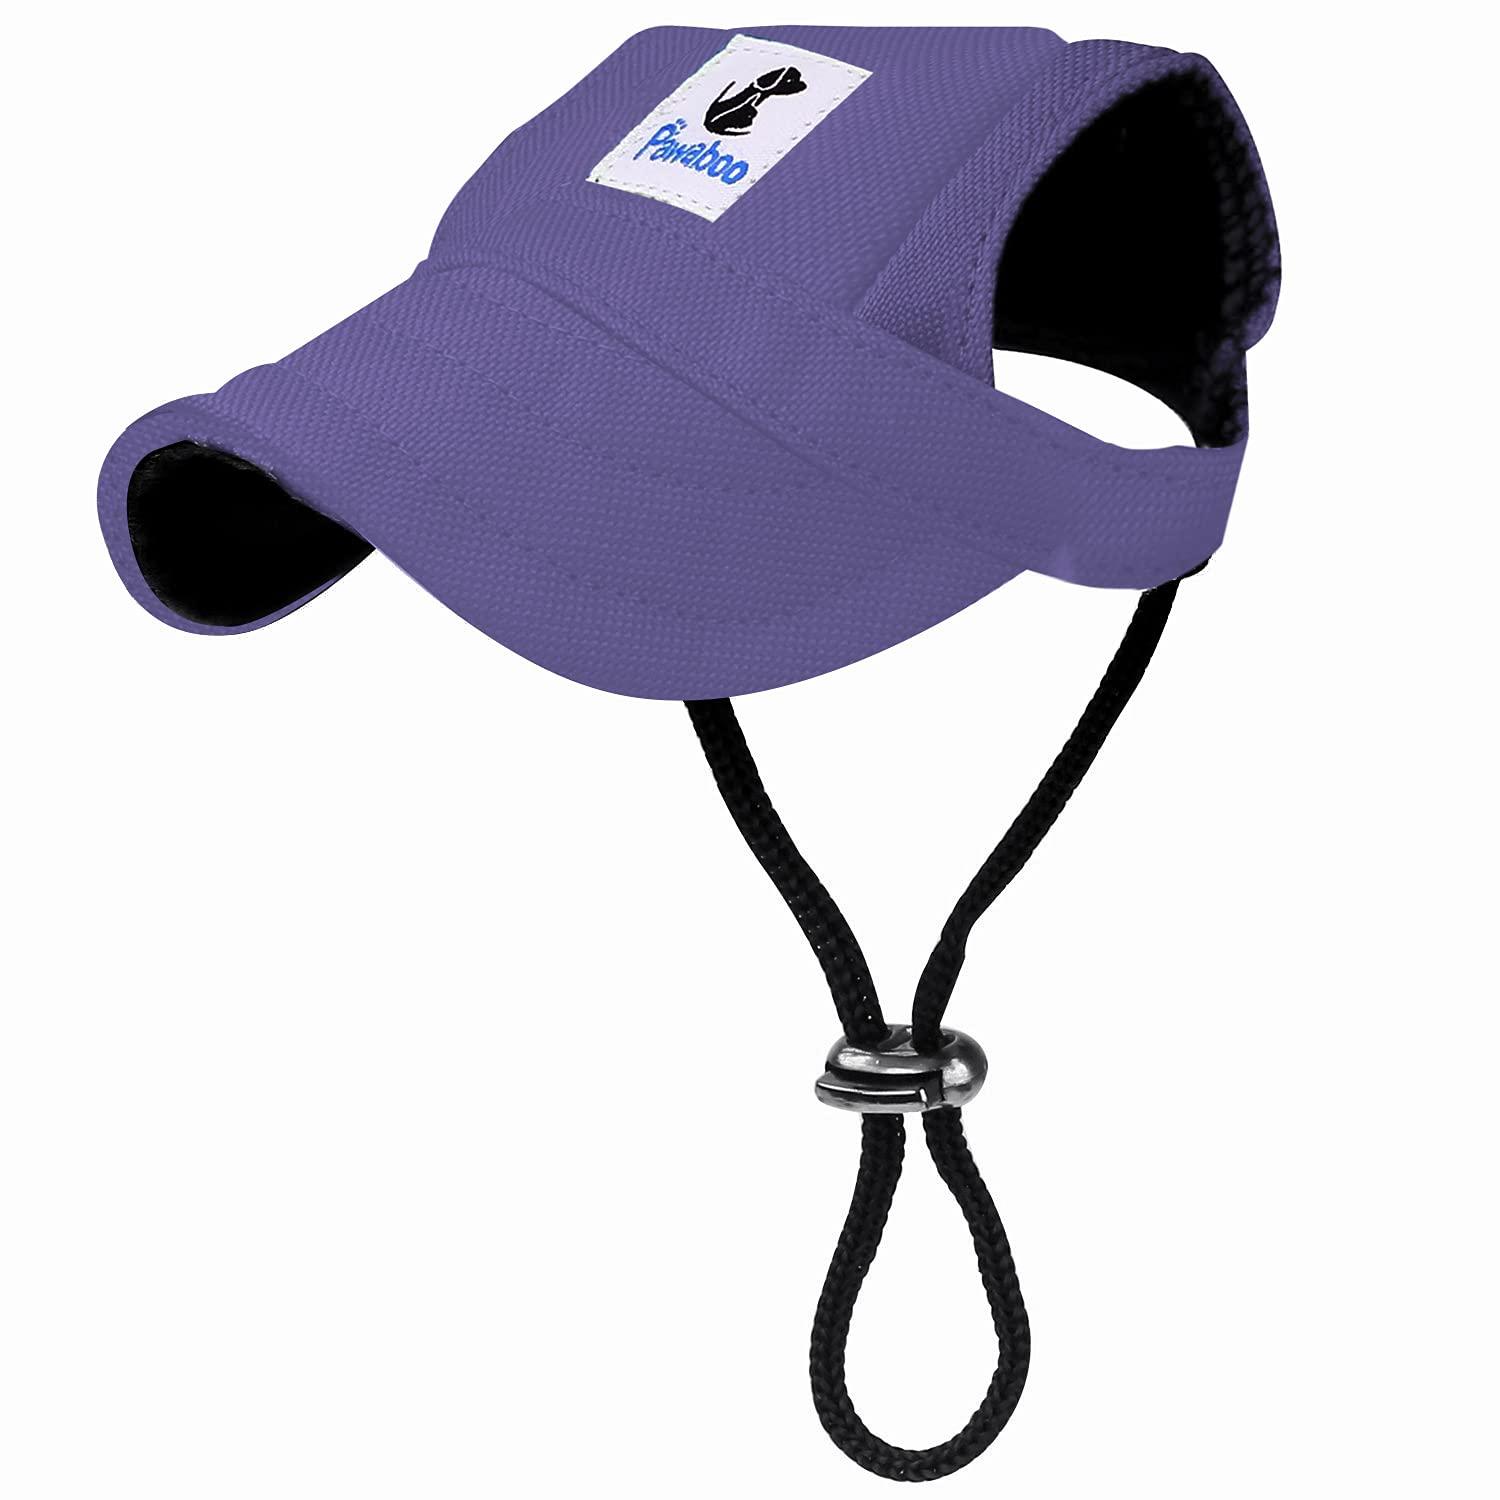 Pawaboo Dog Baseball Cap, Adjustable Dog Outdoor Sport Sun Protection Baseball Hat Cap Visor Sunbonnet Outfit with Ear Holes for Puppy Small Dogs, XL, Purple